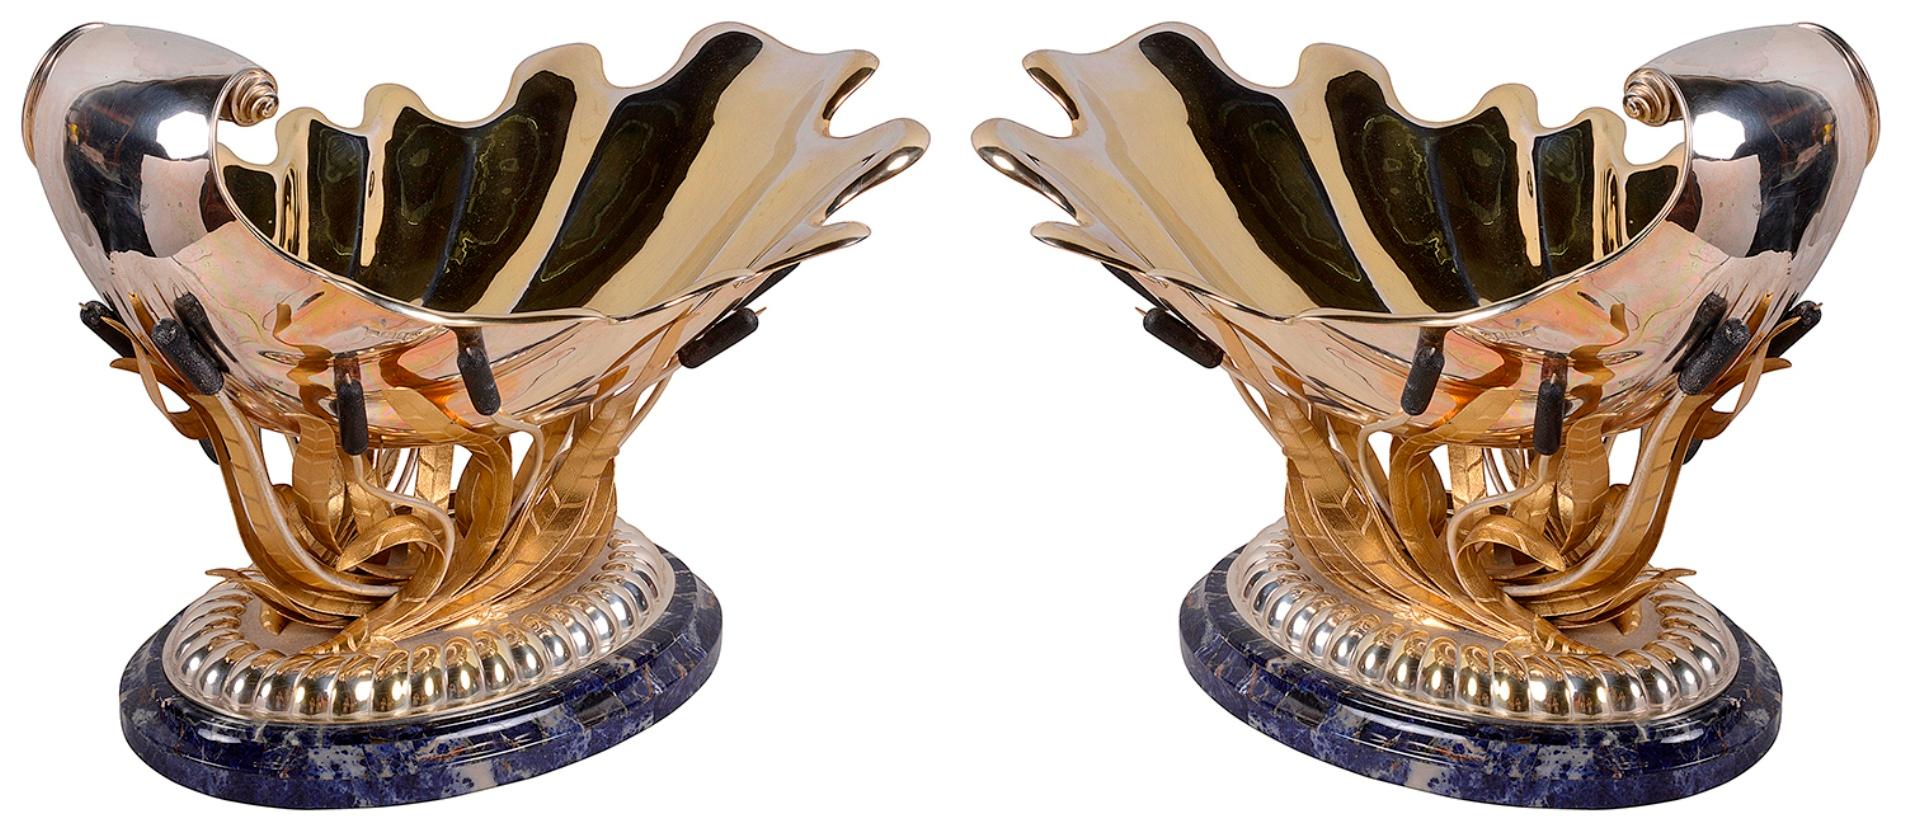 A wonderful fine quality pair of silver gilt sea shell jardinieres, raised on swirling bulrushes and mounted on hardstone bases. Measures: 45cm(18